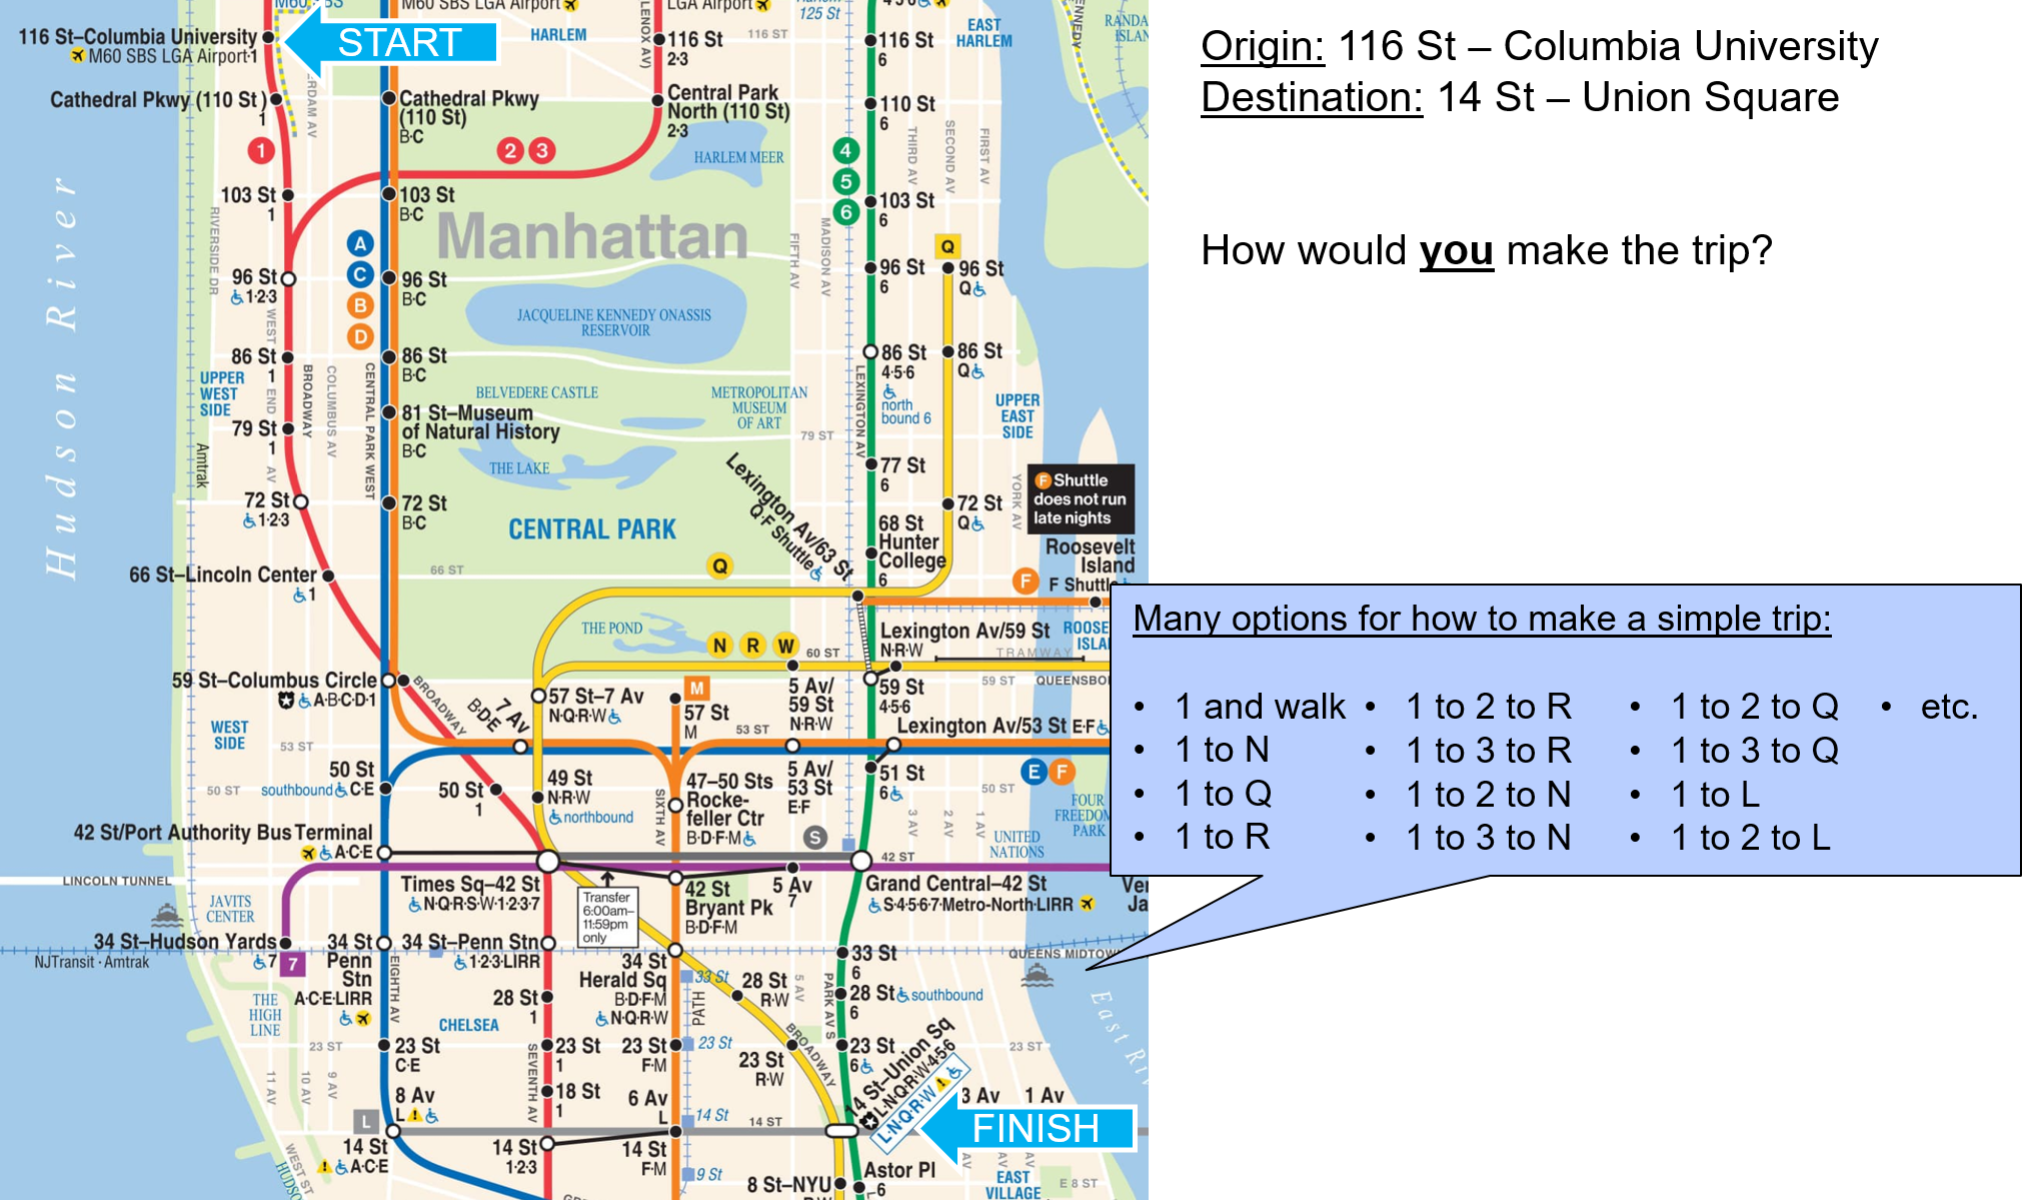 A subway map showing a trip from 116 St-Columbia University to 14 St-Union Sq. Many options are shown for making the trip: 1 and walk, 1 to N, 1 to Q, 1 to R, 1 to 2 to R, etc.